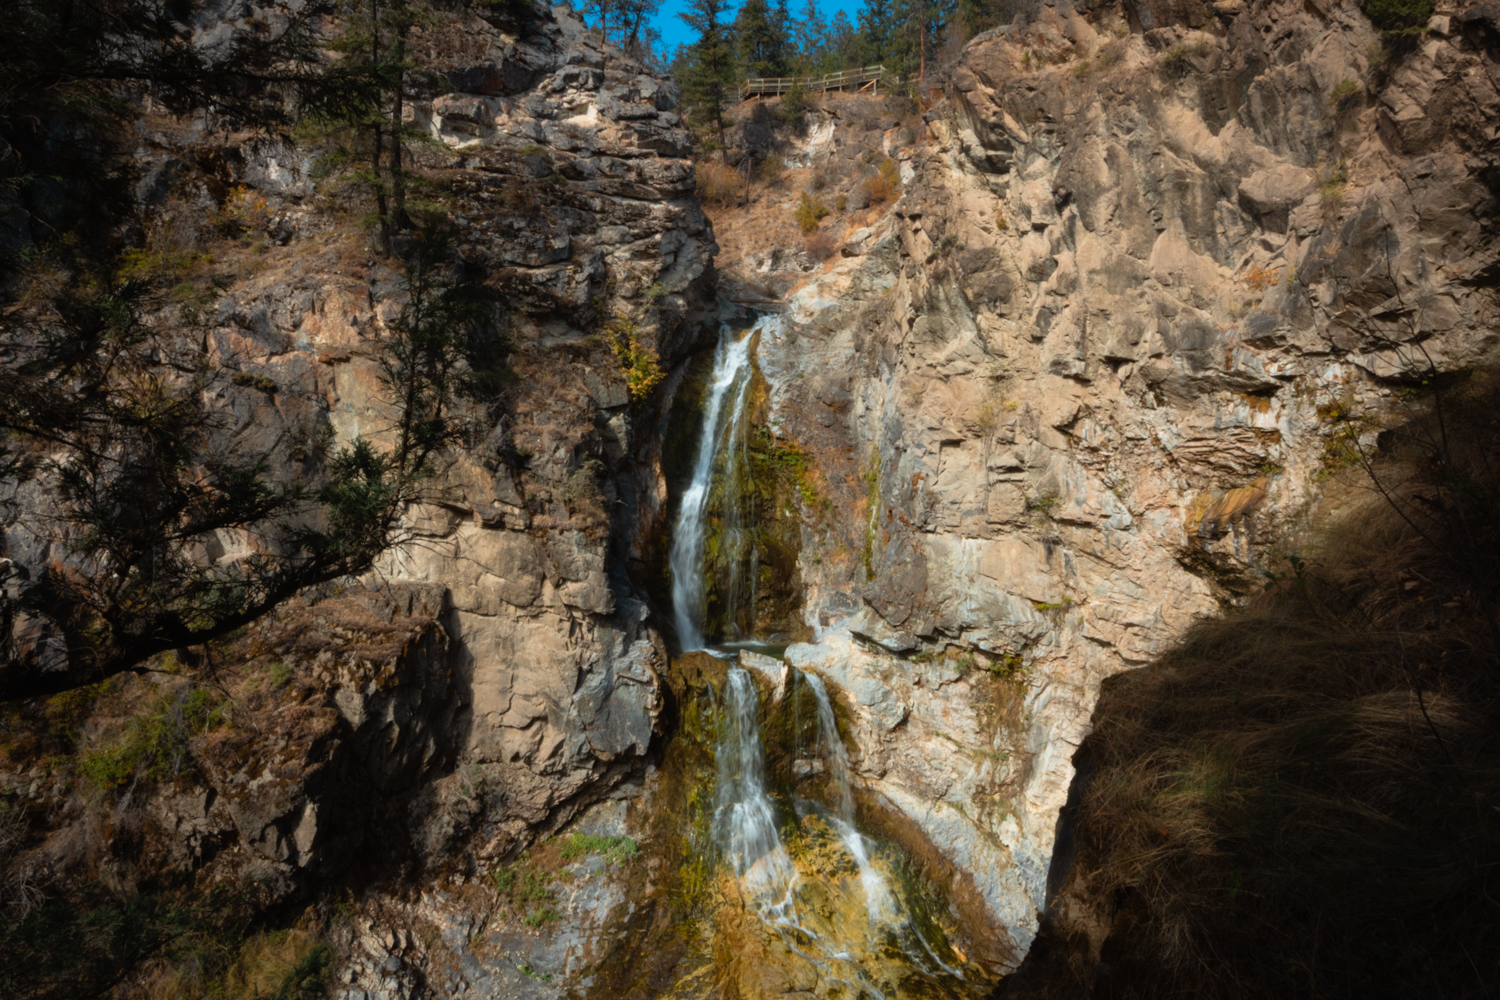 A small amount of water tumbles down Fintry Falls in the fall